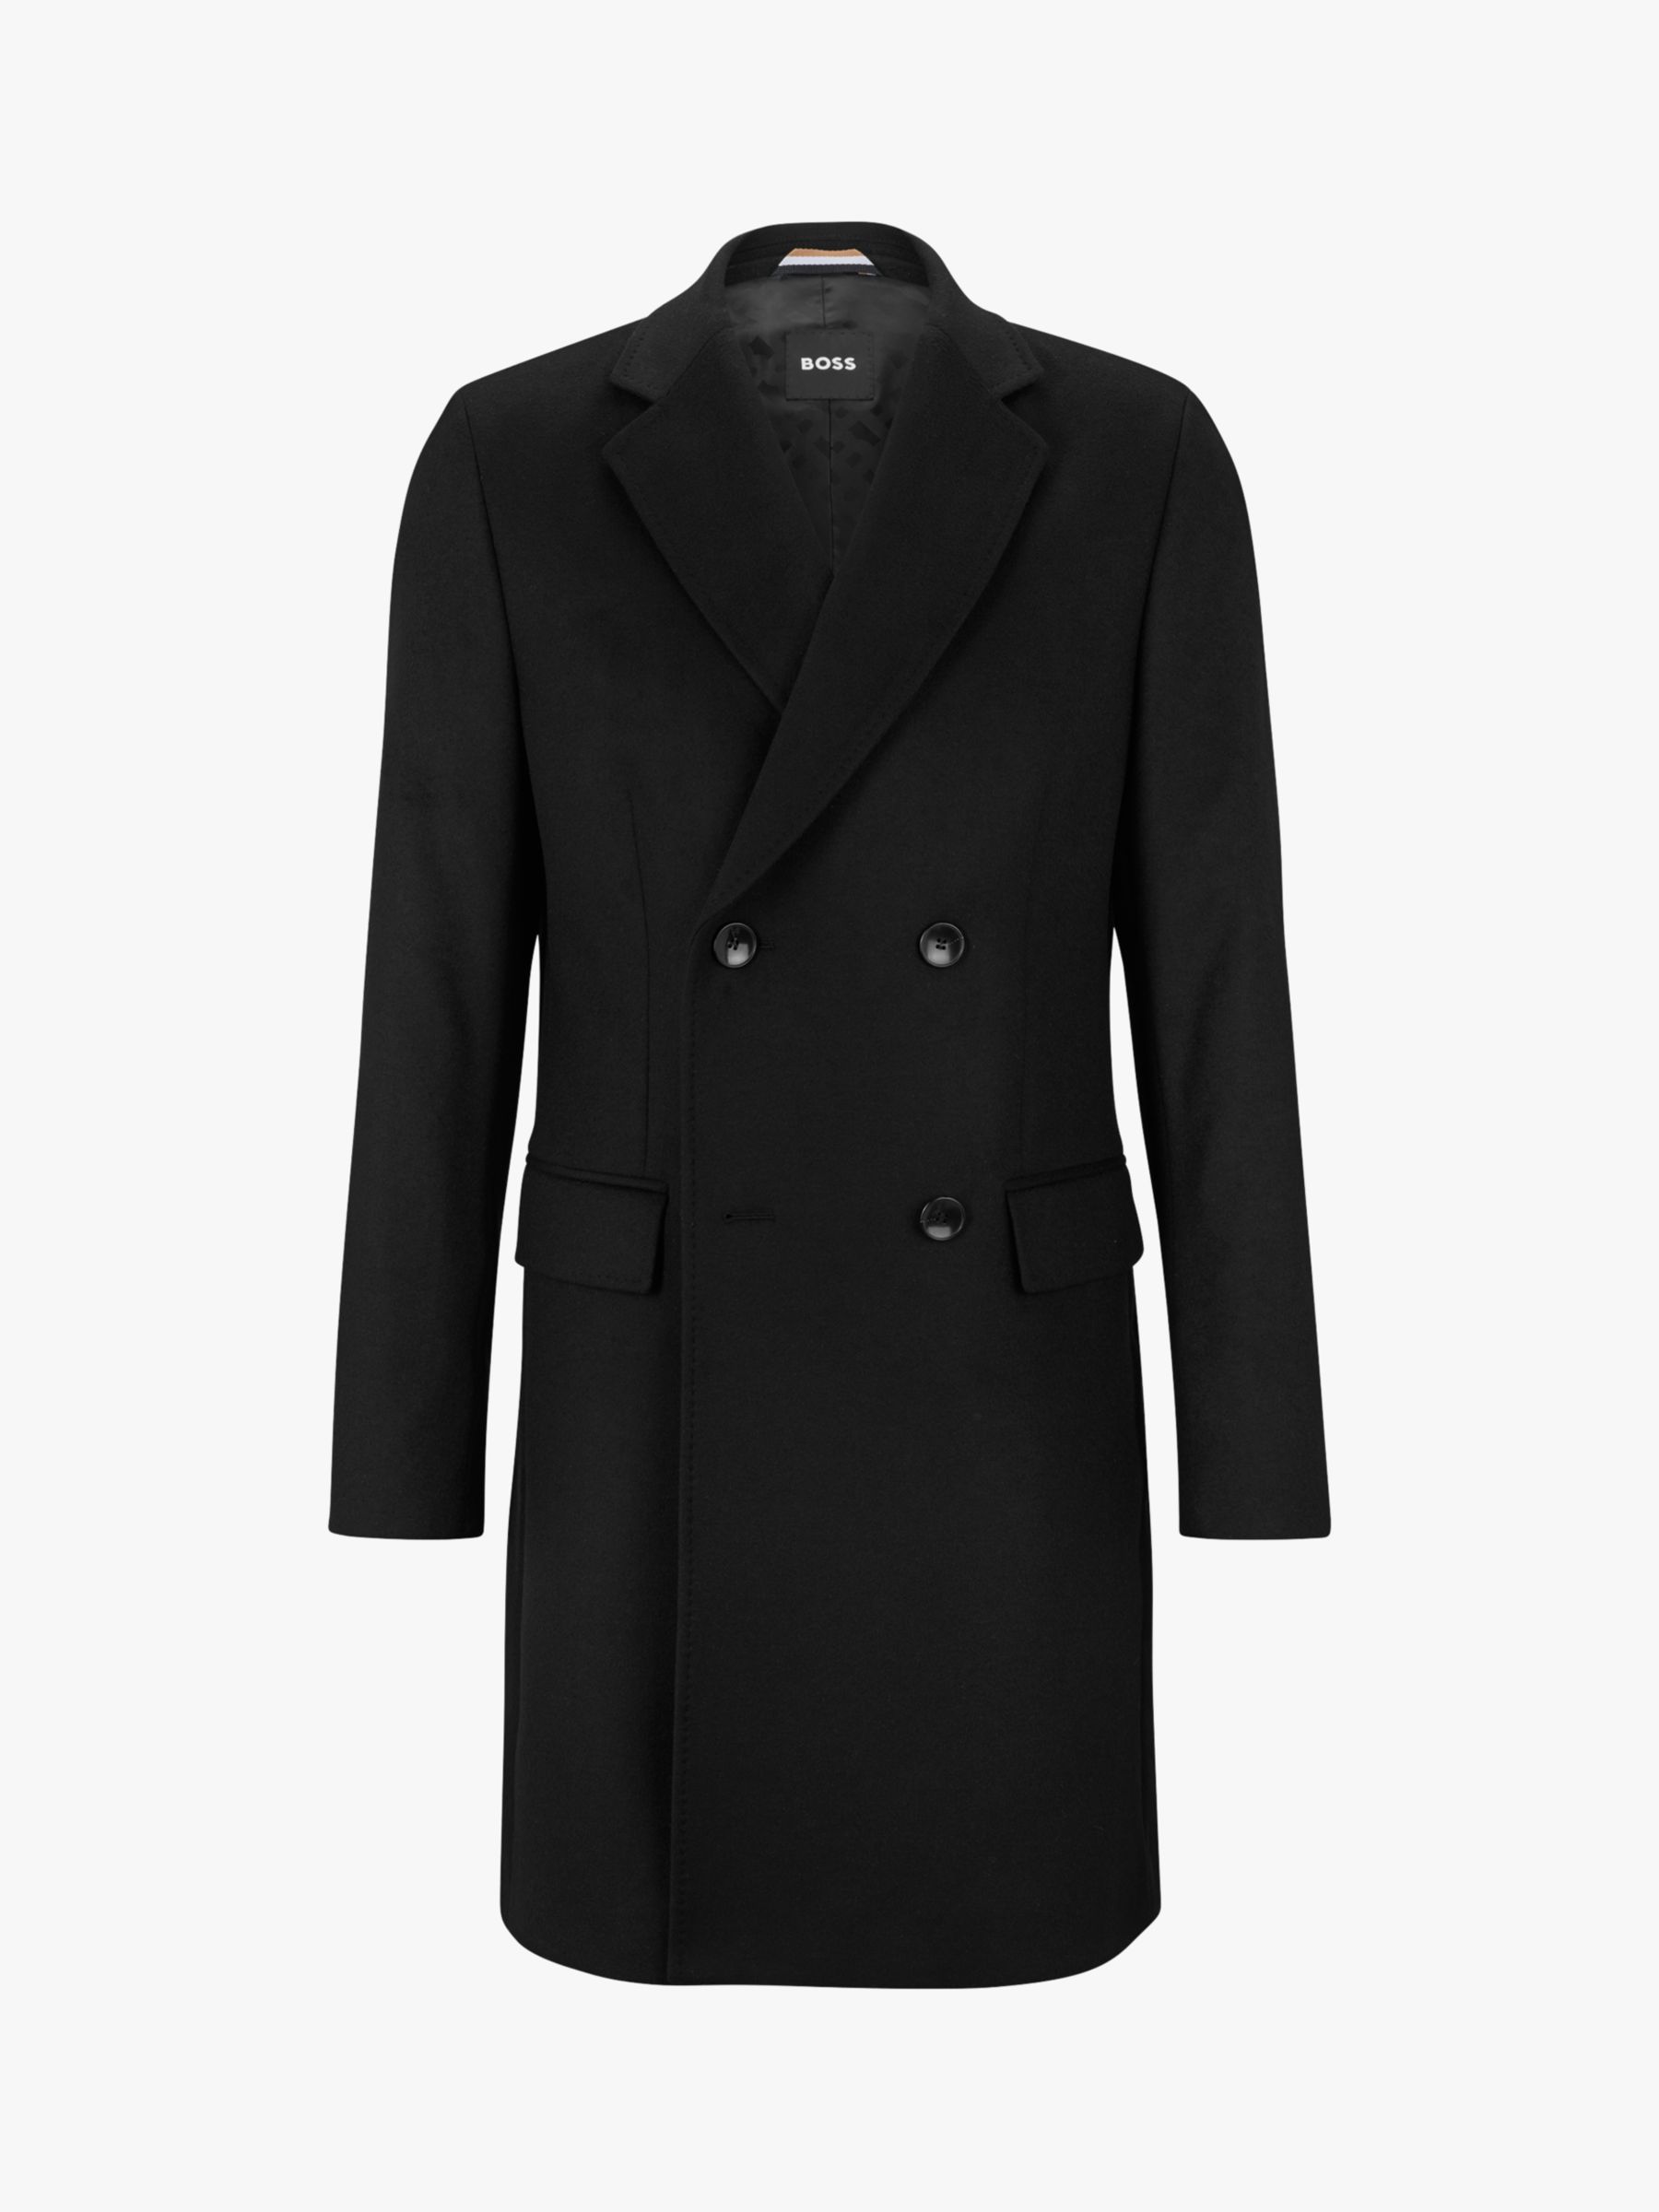 BOSS Hyde Double Breasted Wool and Cashmere Coat, Black at John Lewis ...